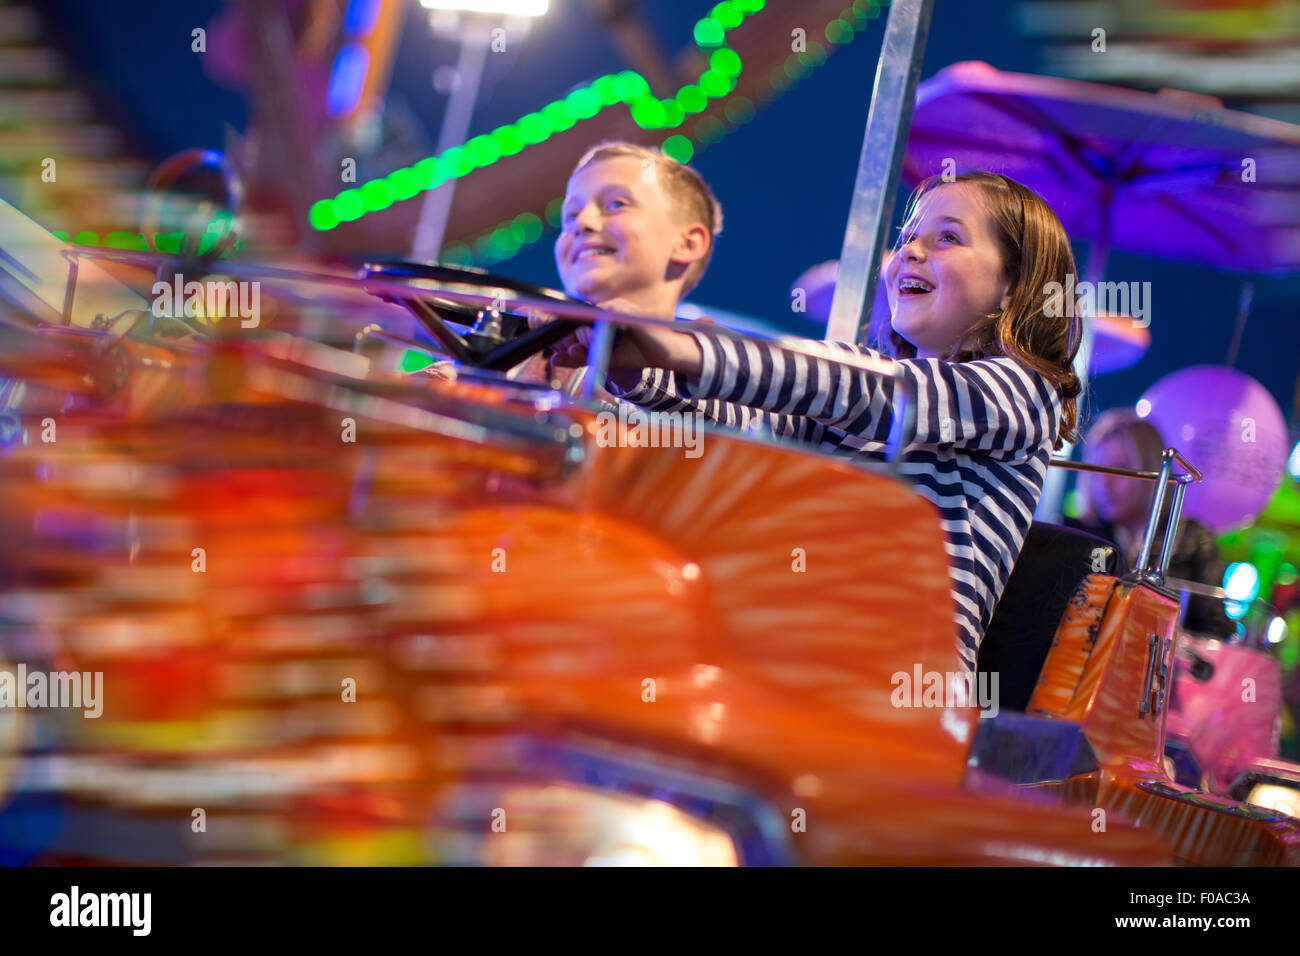 Brother and sister on fairground ride at night Stock Photo